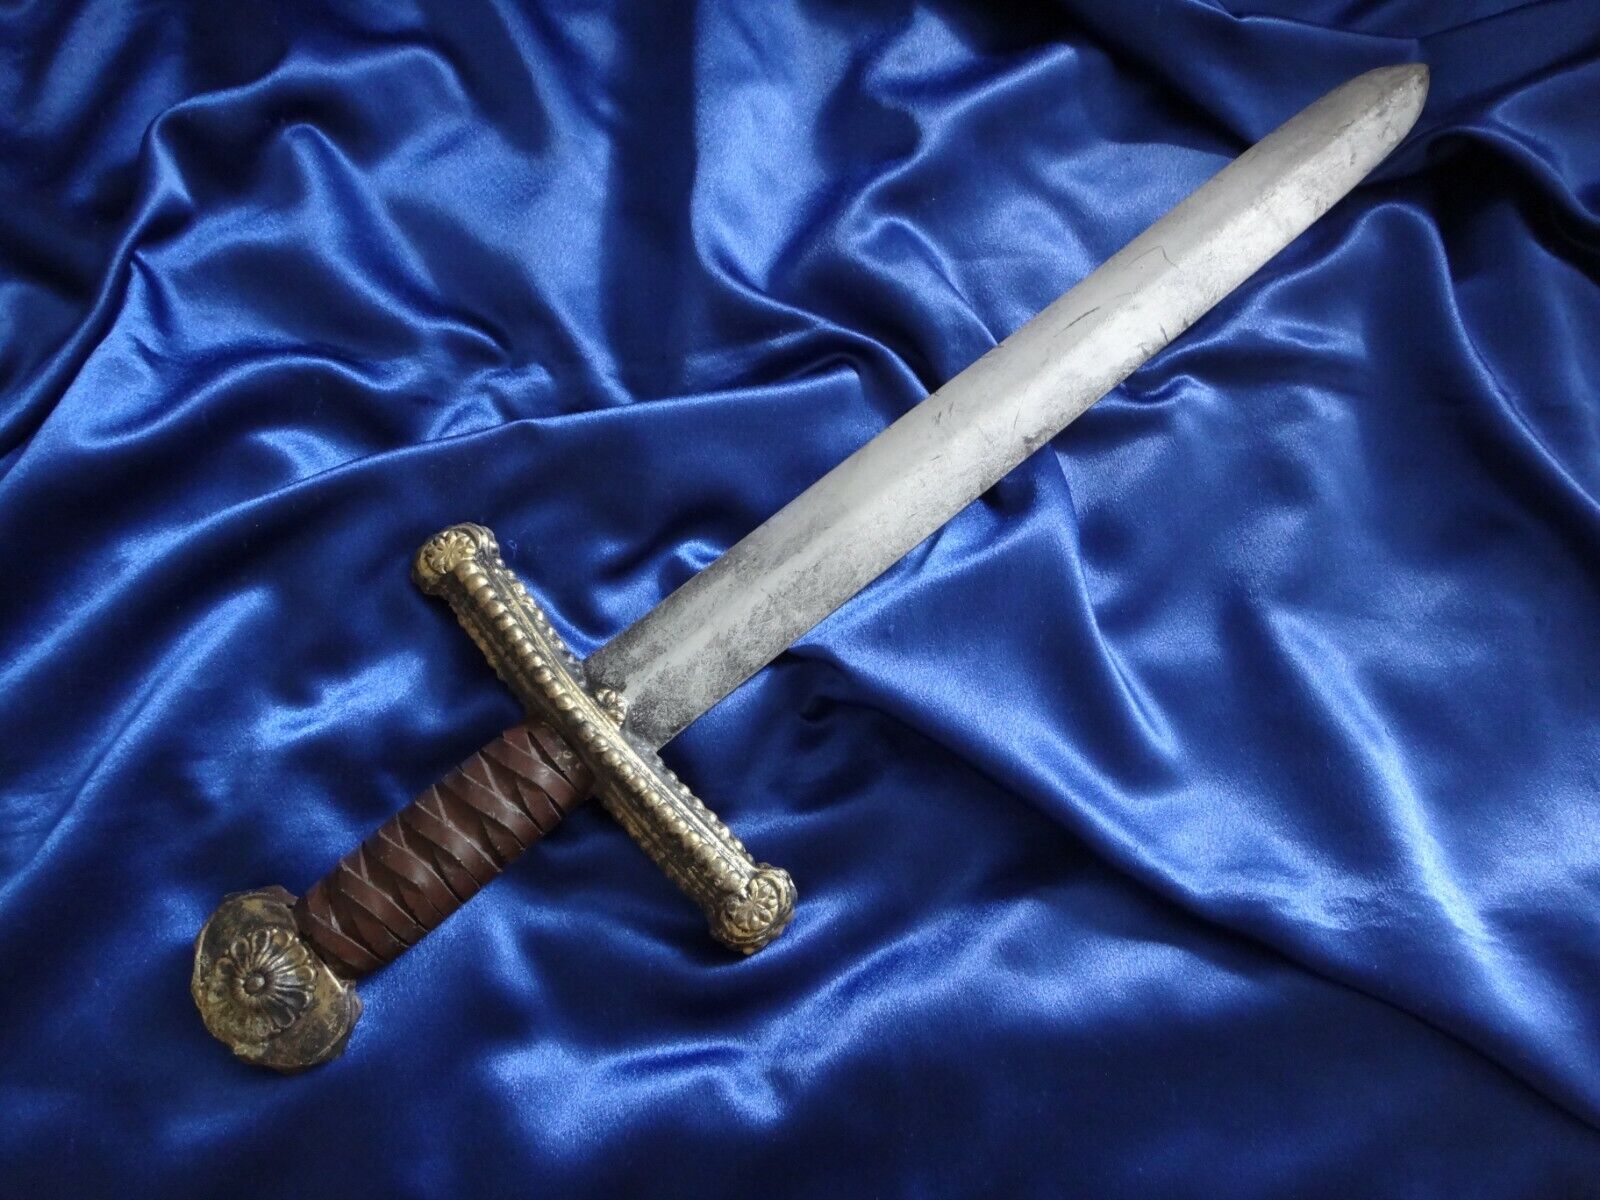 EXTREMELY RARE Young Hercules (Ryan Gosling) Sword Prop #3 